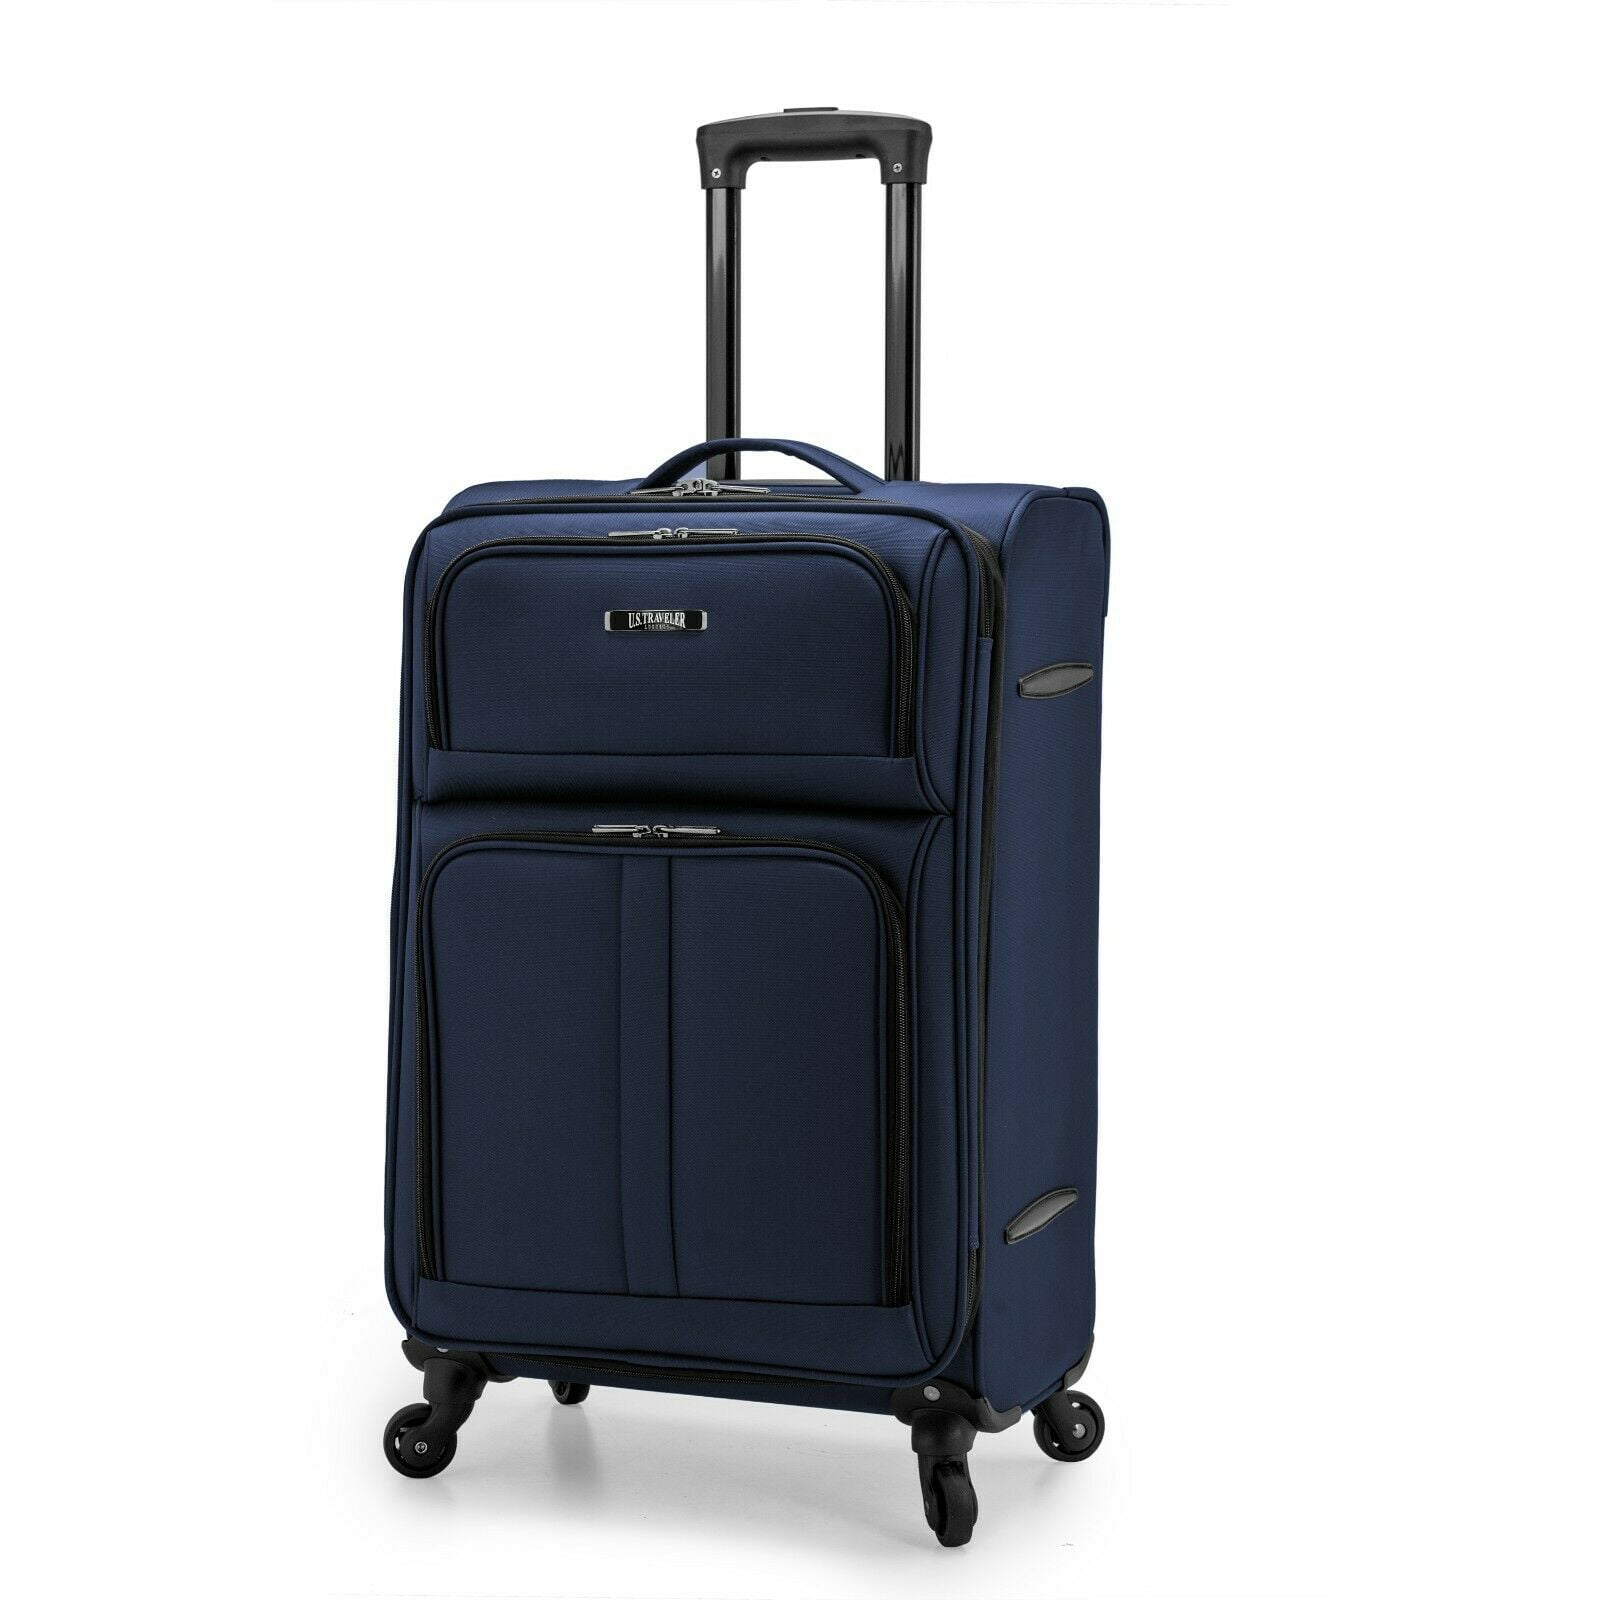 U.S. Traveler Anzio Softside Expandable Spinner Luggage, Teal, Carry-On 22-inch